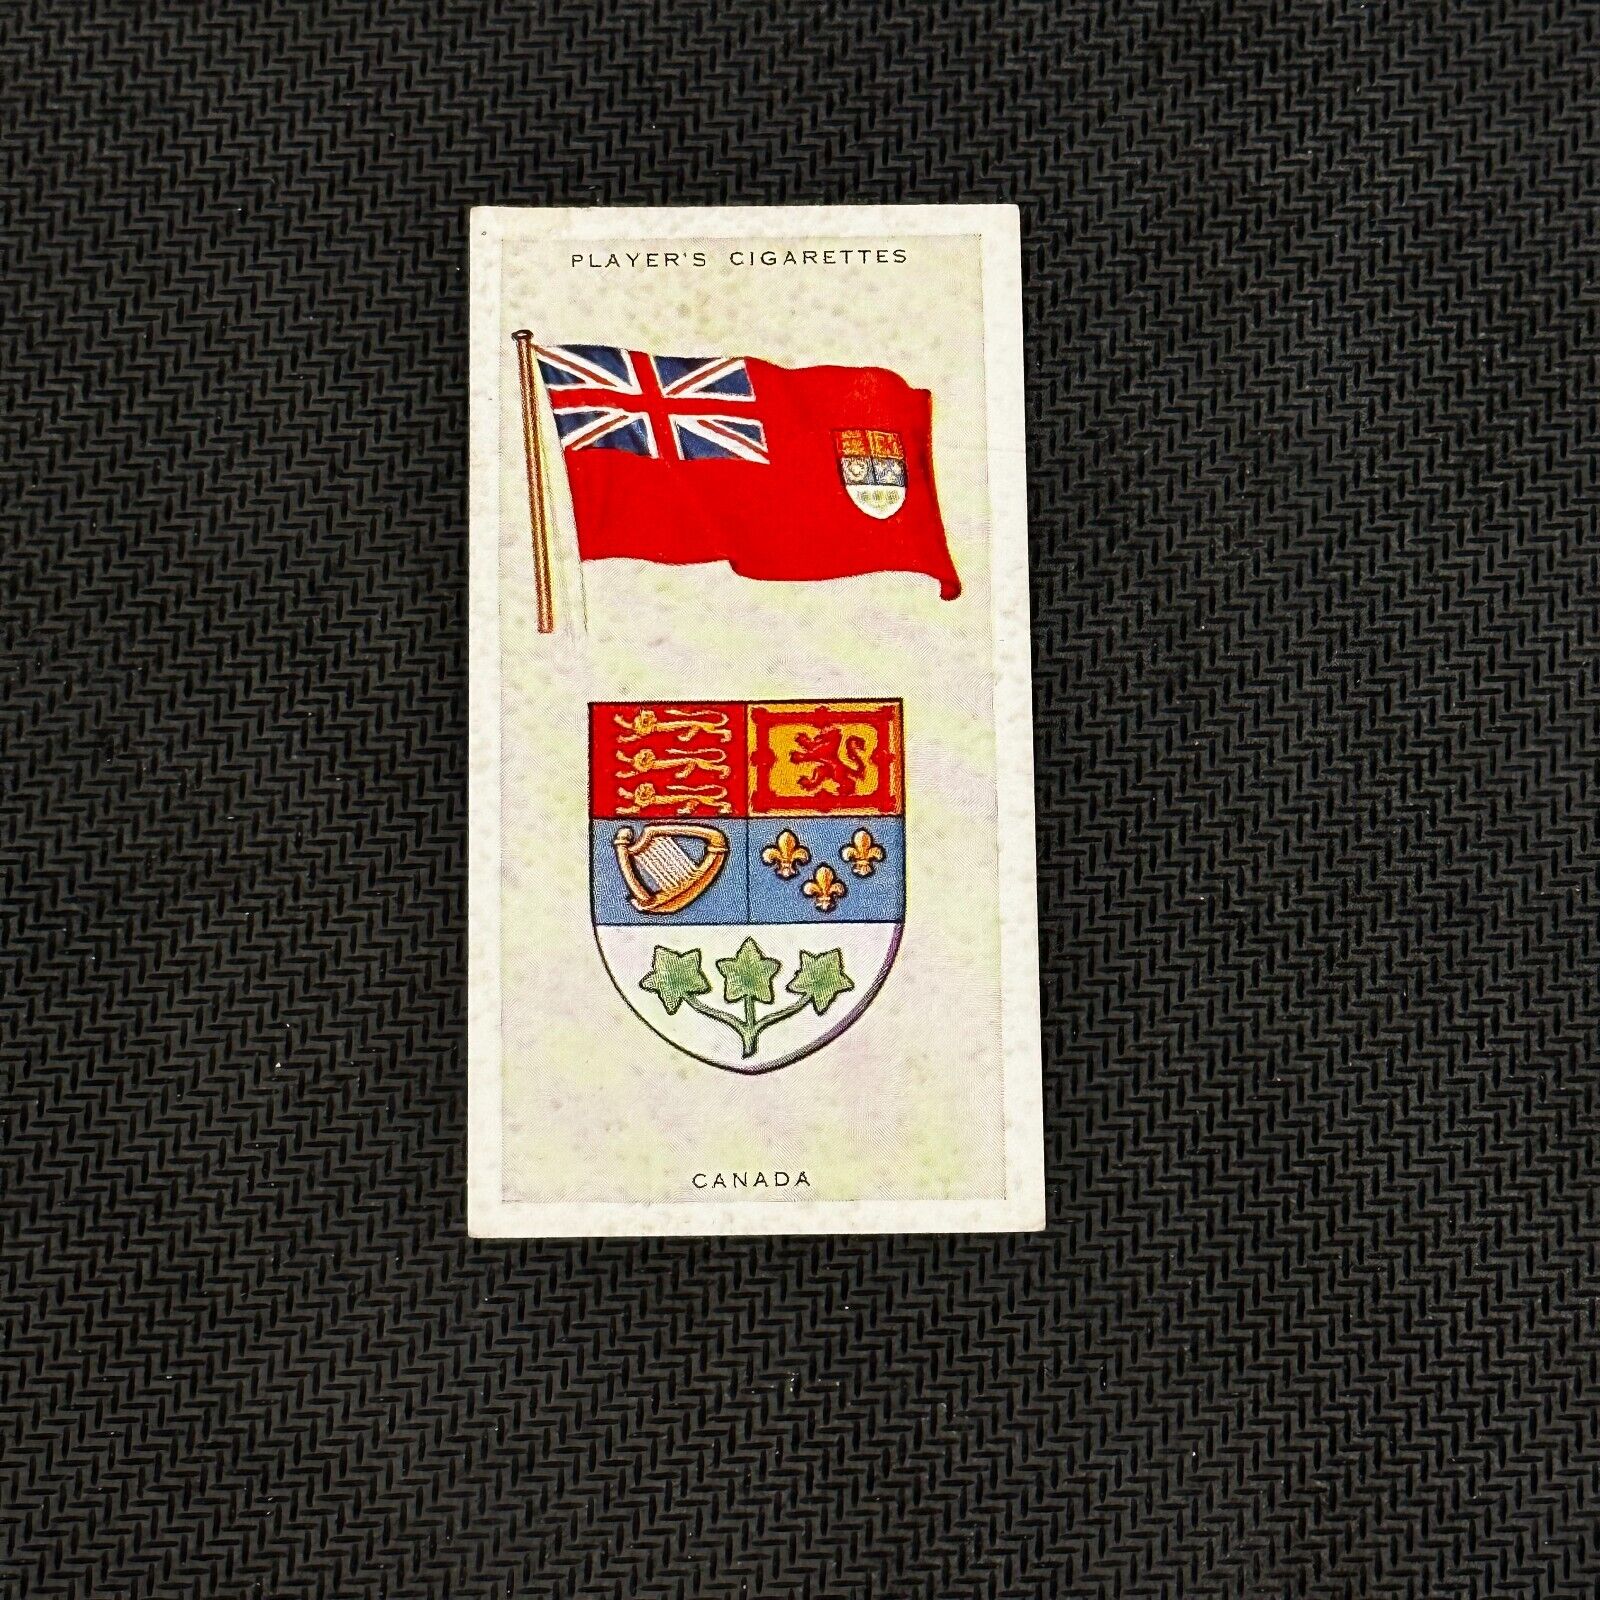 1936 John Player Cigarettes Card - National Flags and Arms #8 Canada - Tobacco